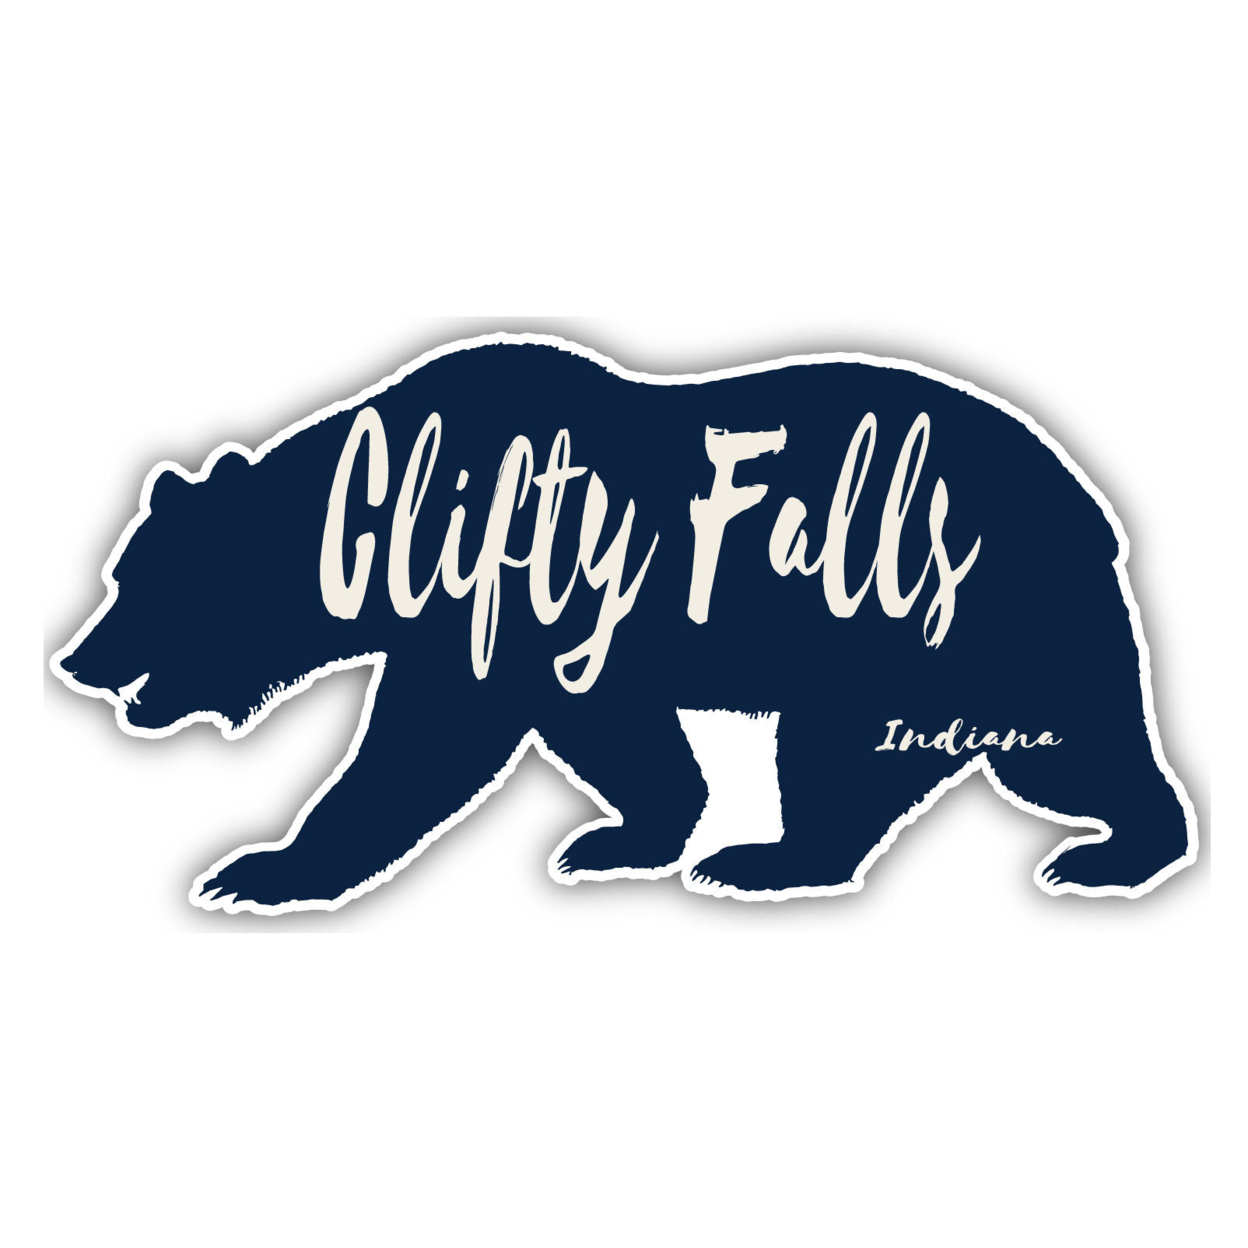 Clifty Falls Indiana Souvenir Decorative Stickers (Choose Theme And Size) - Single Unit, 6-Inch, Bear